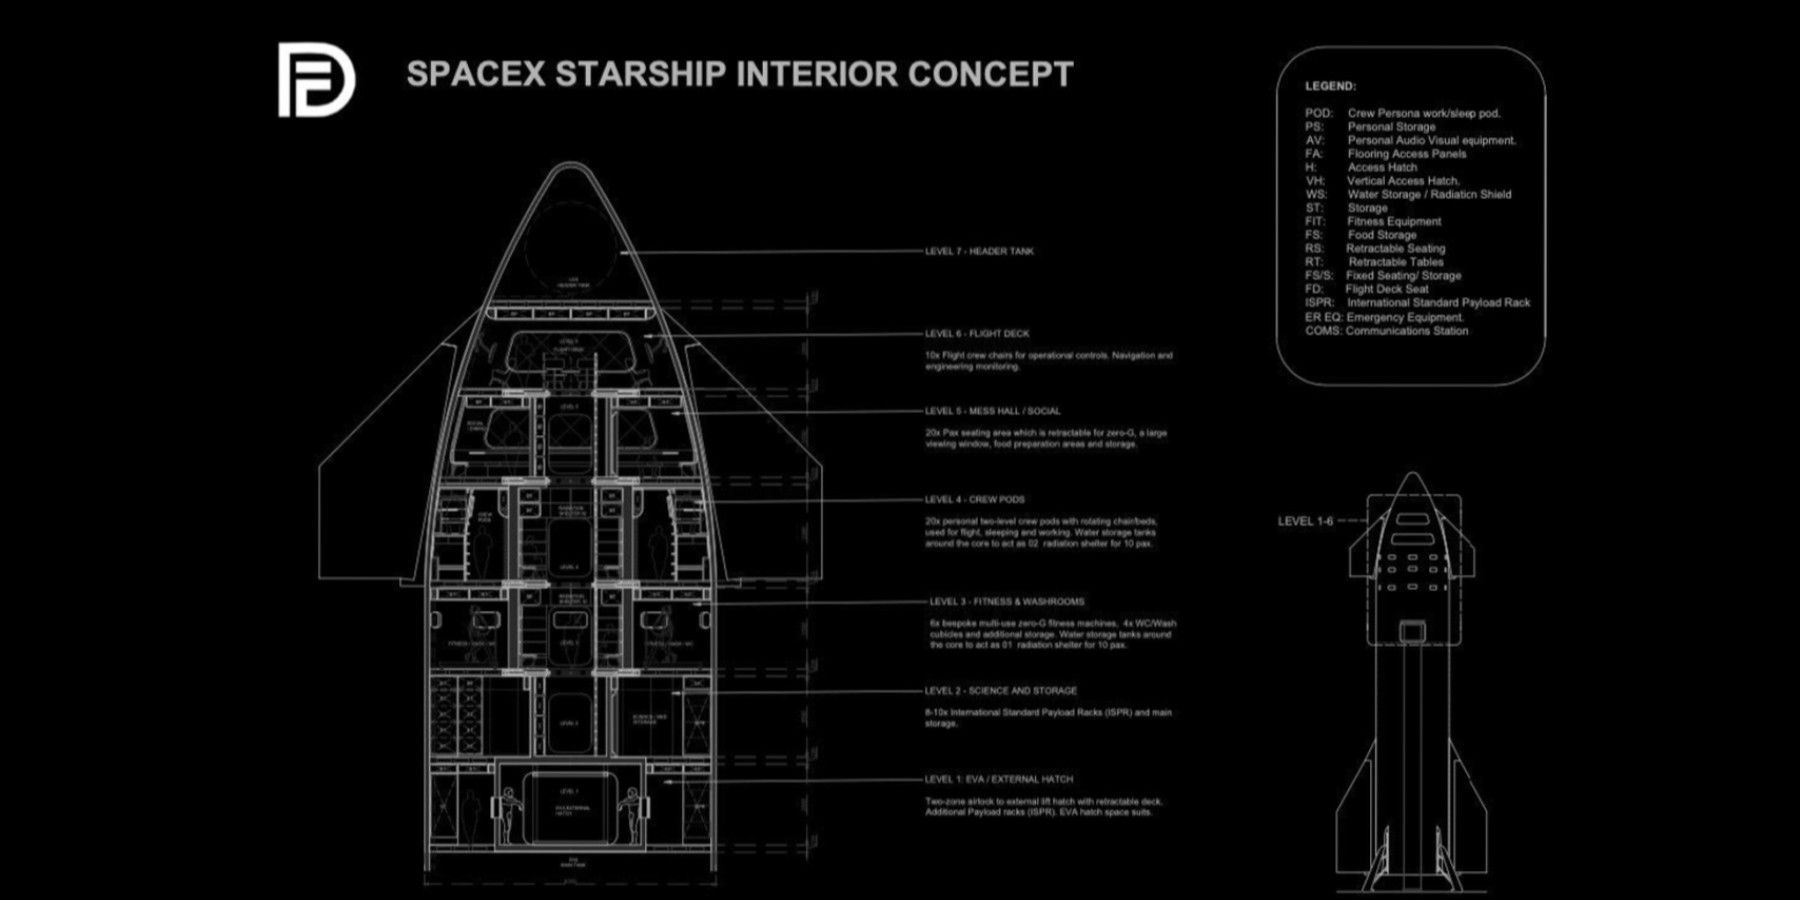 NASA Insider Thinks Space Agency Is Ignoring SpaceX’s Starship – Here’s Why